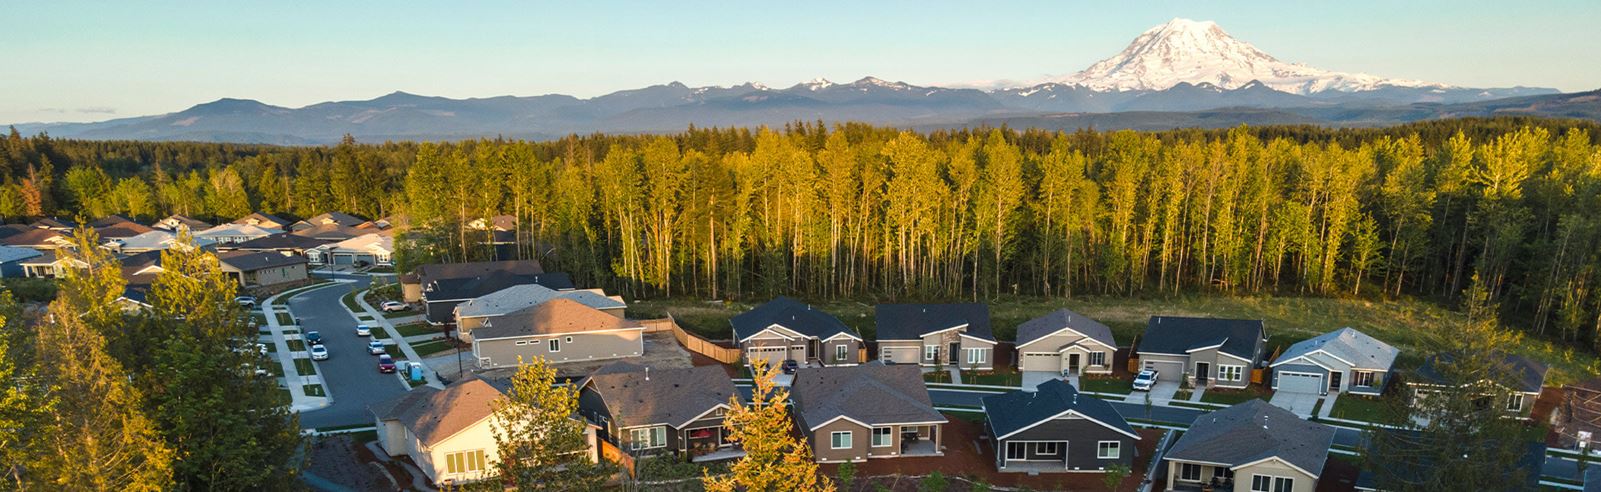 Tehaleh homes with Mount Rainier in the background